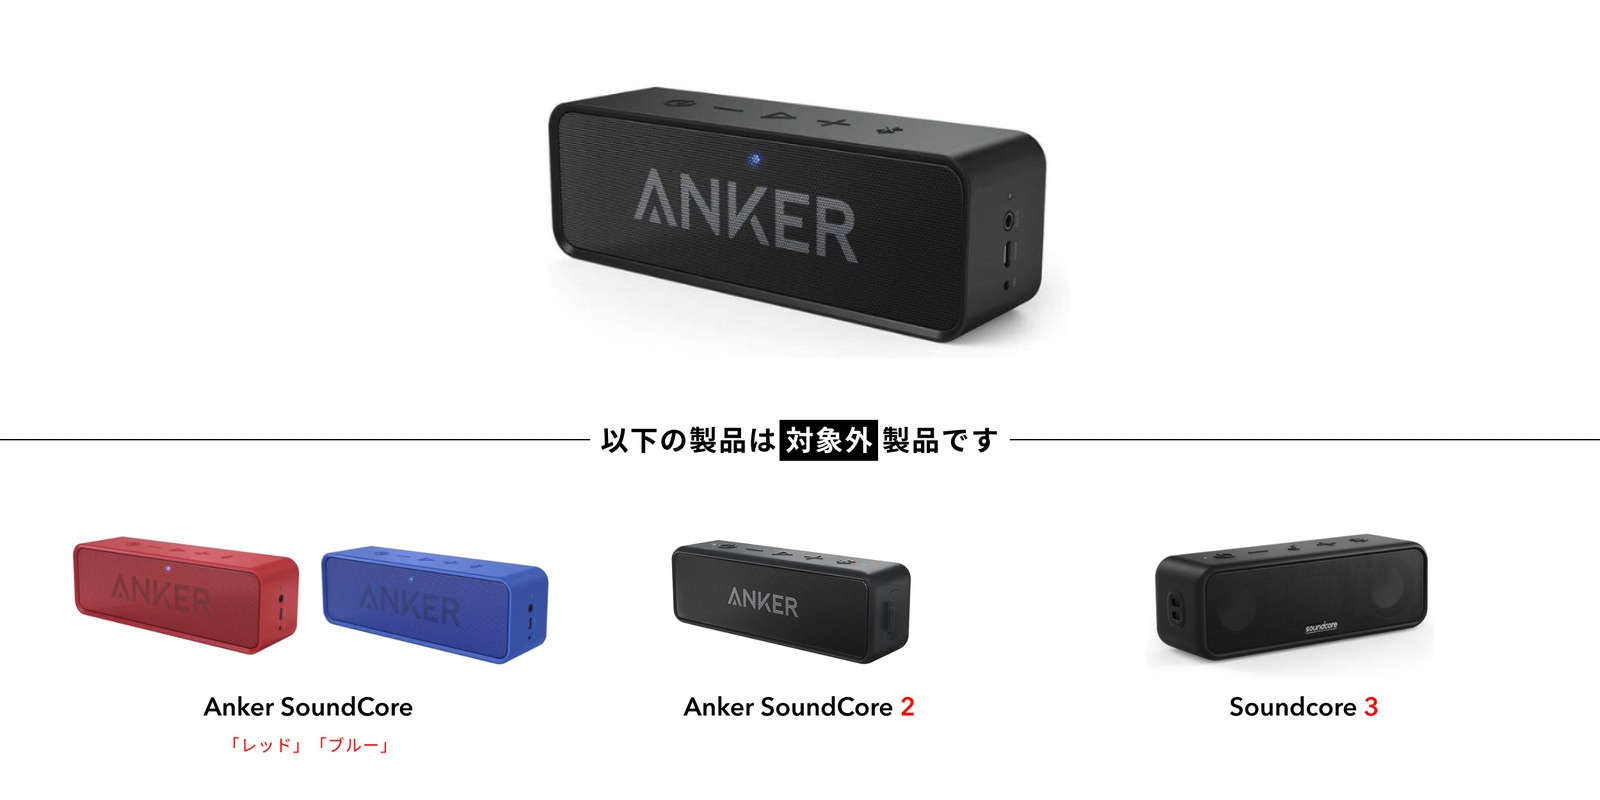 Anker-Soundcore-products-01.jpg